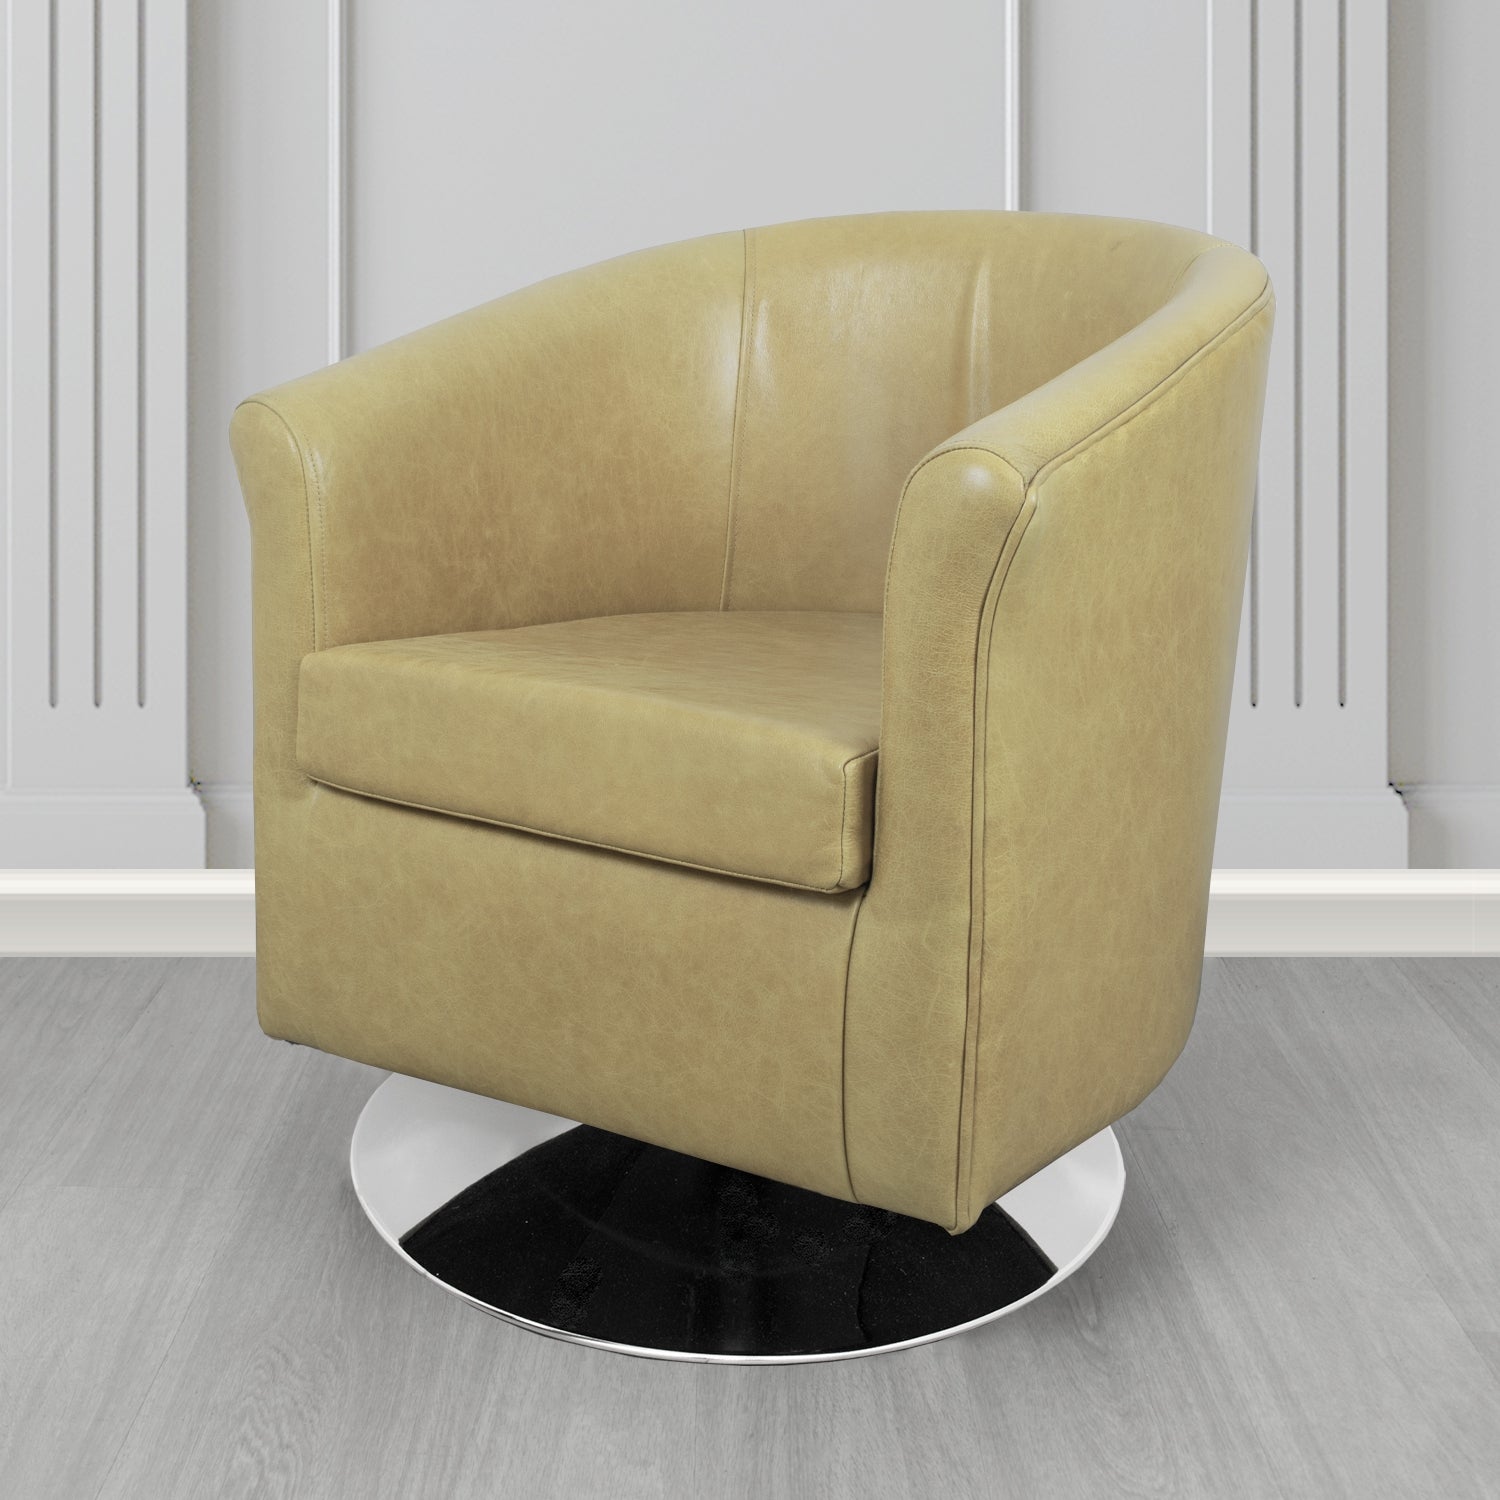 Tuscany Swivel Tub Chair in Crib 5 Old English Parchment Genuine Leather - The Tub Chair Shop